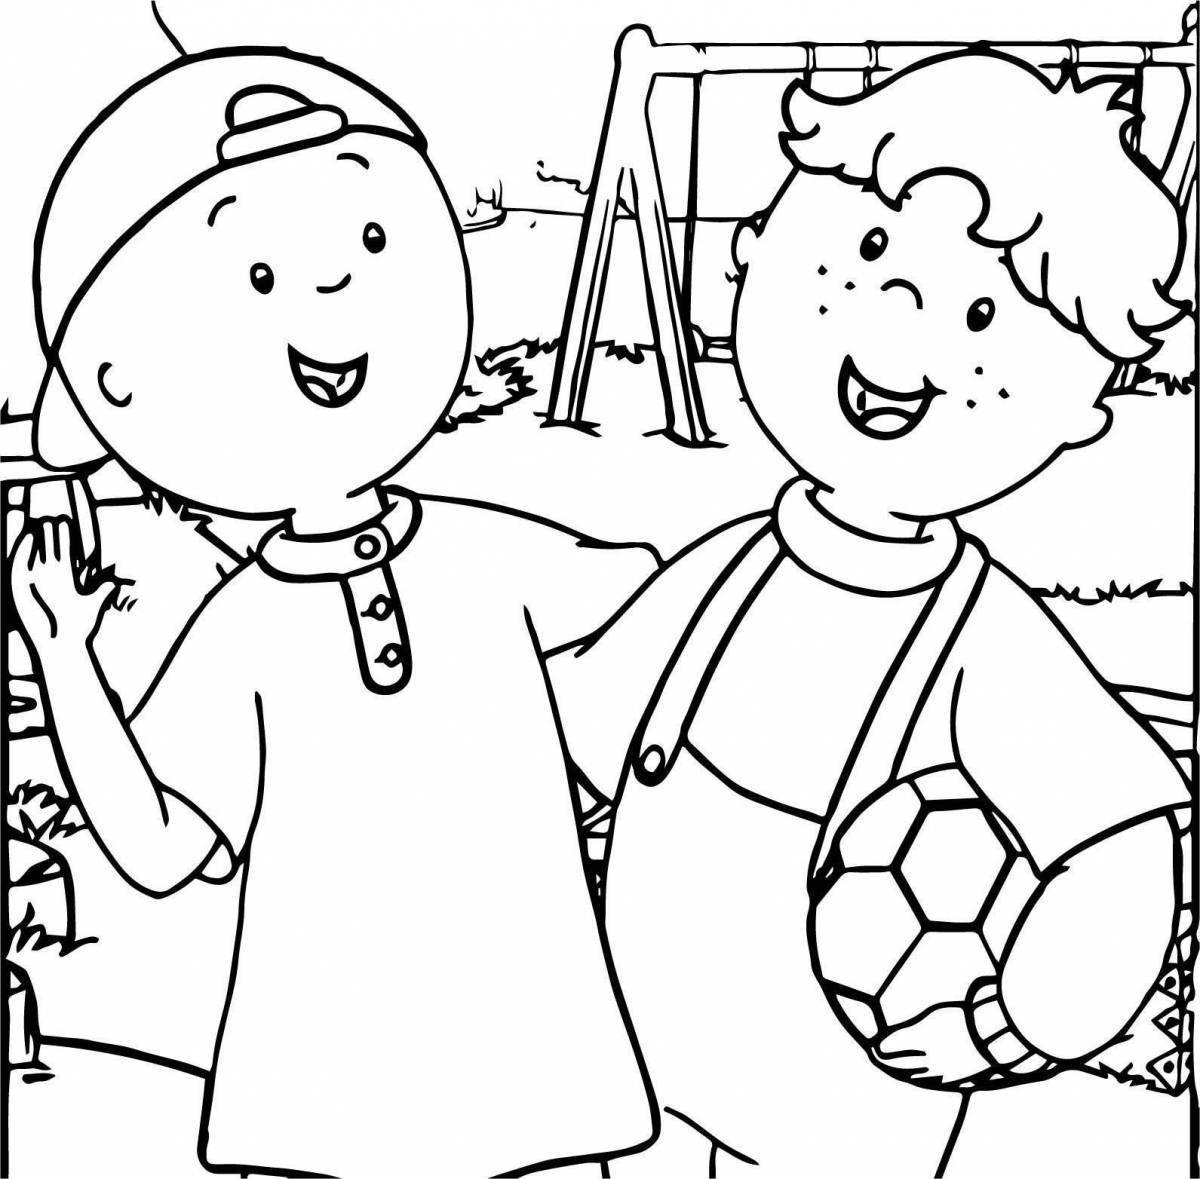 Coloring-gatherings friends coloring page